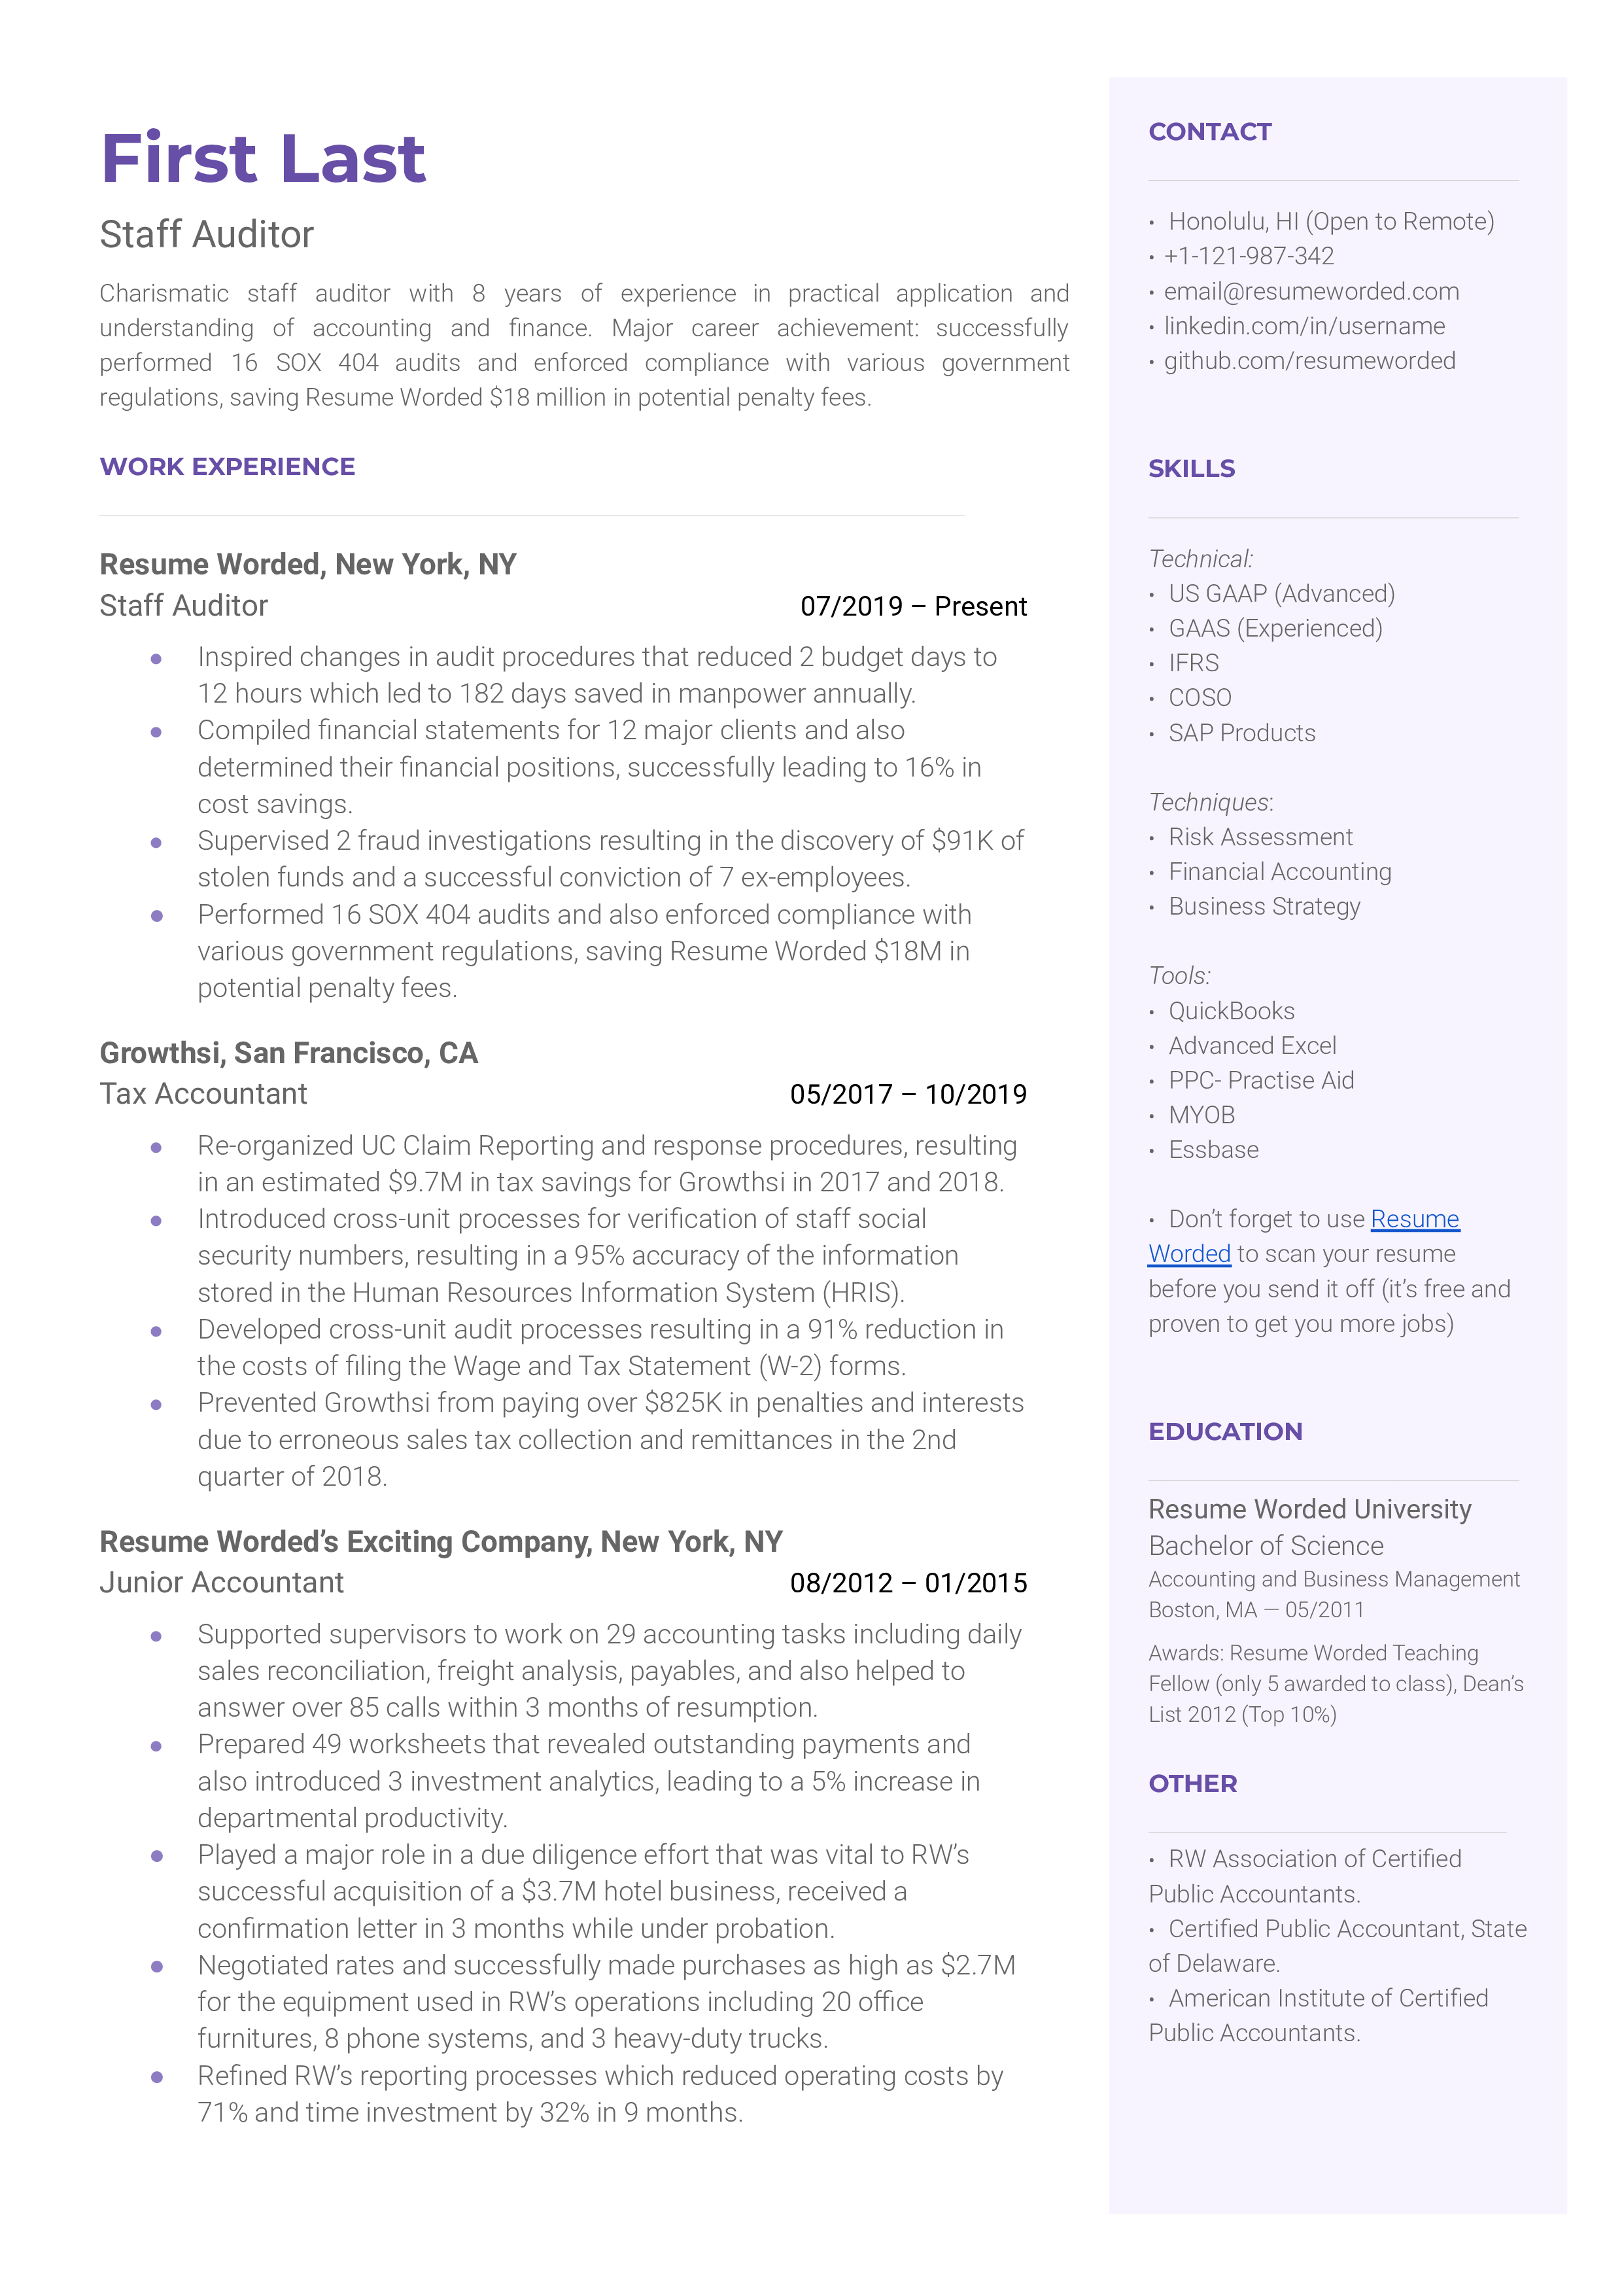 Staff Auditor Resume Template + Example